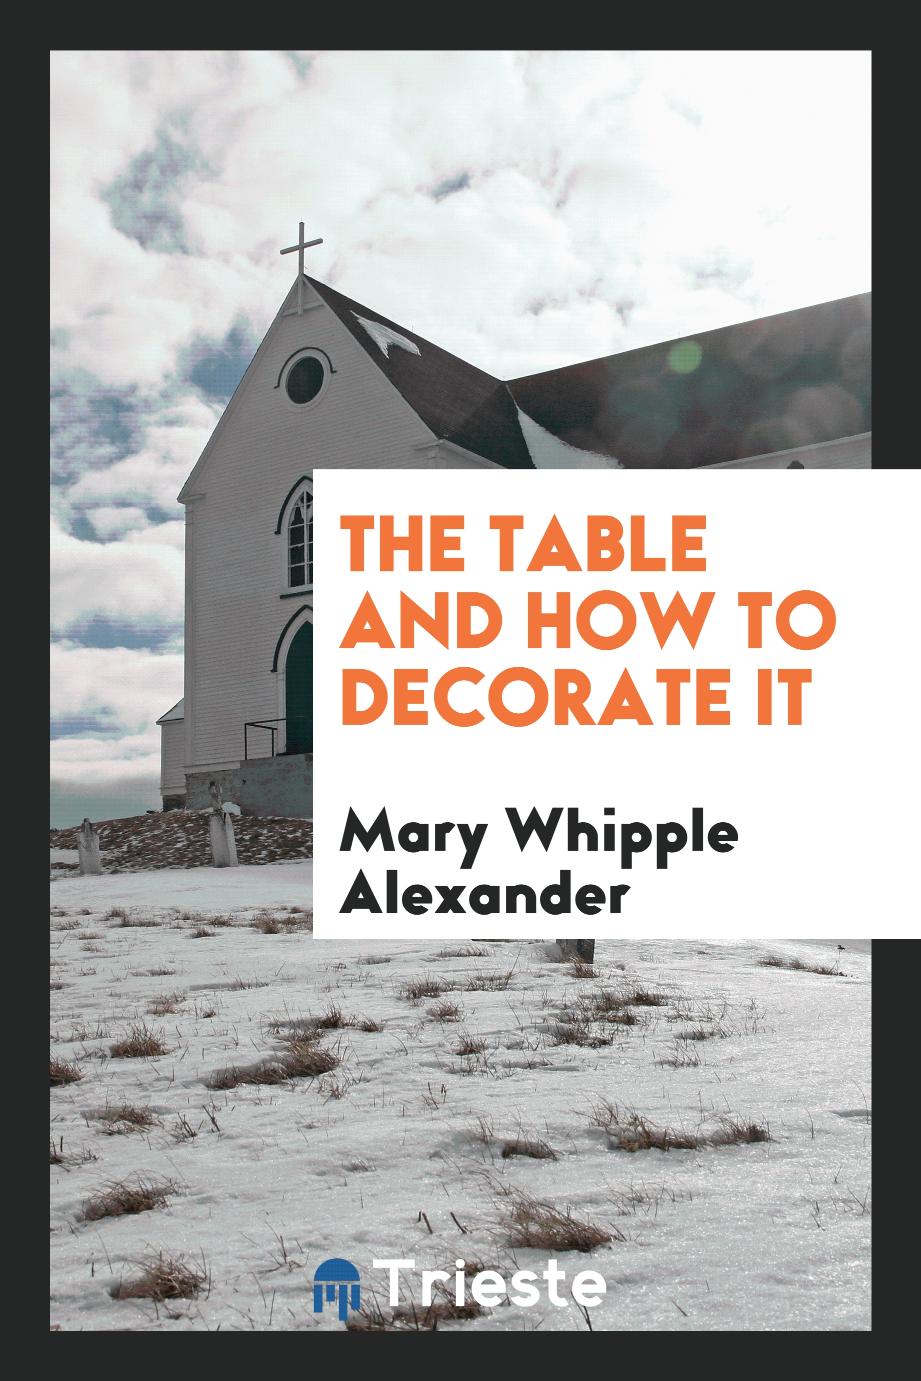 The Table and How to Decorate It